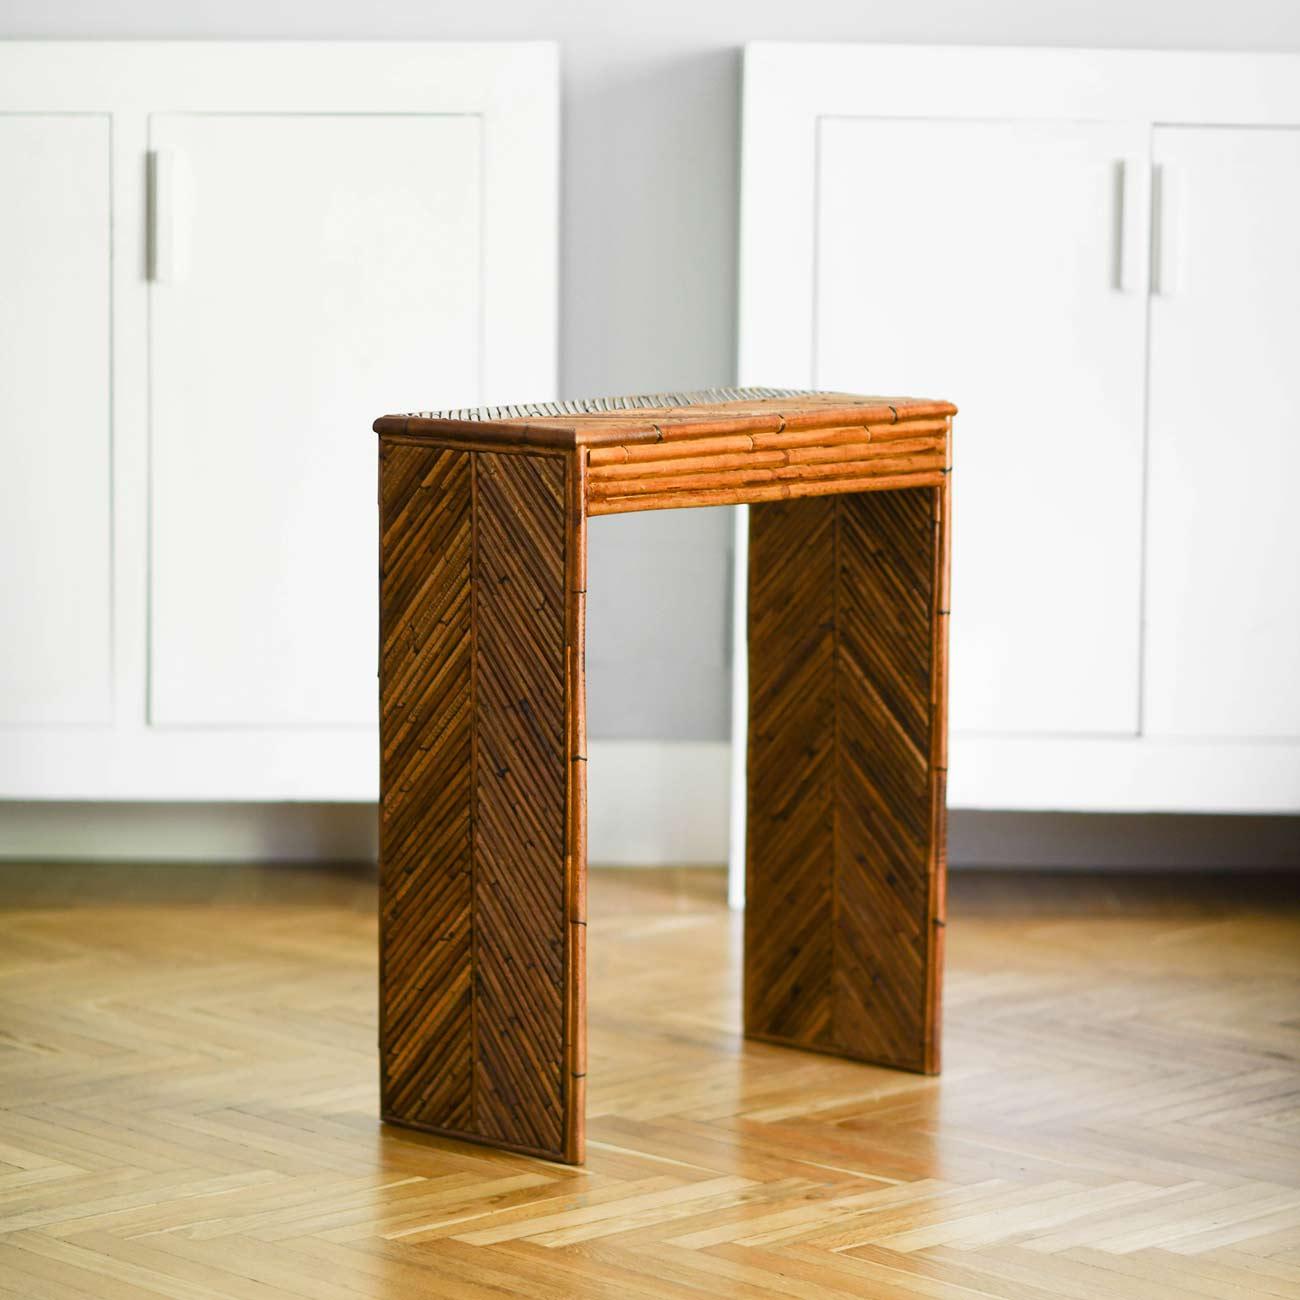 Console in Bamboo. Italian manifacture.
Other dimensions available on request. 